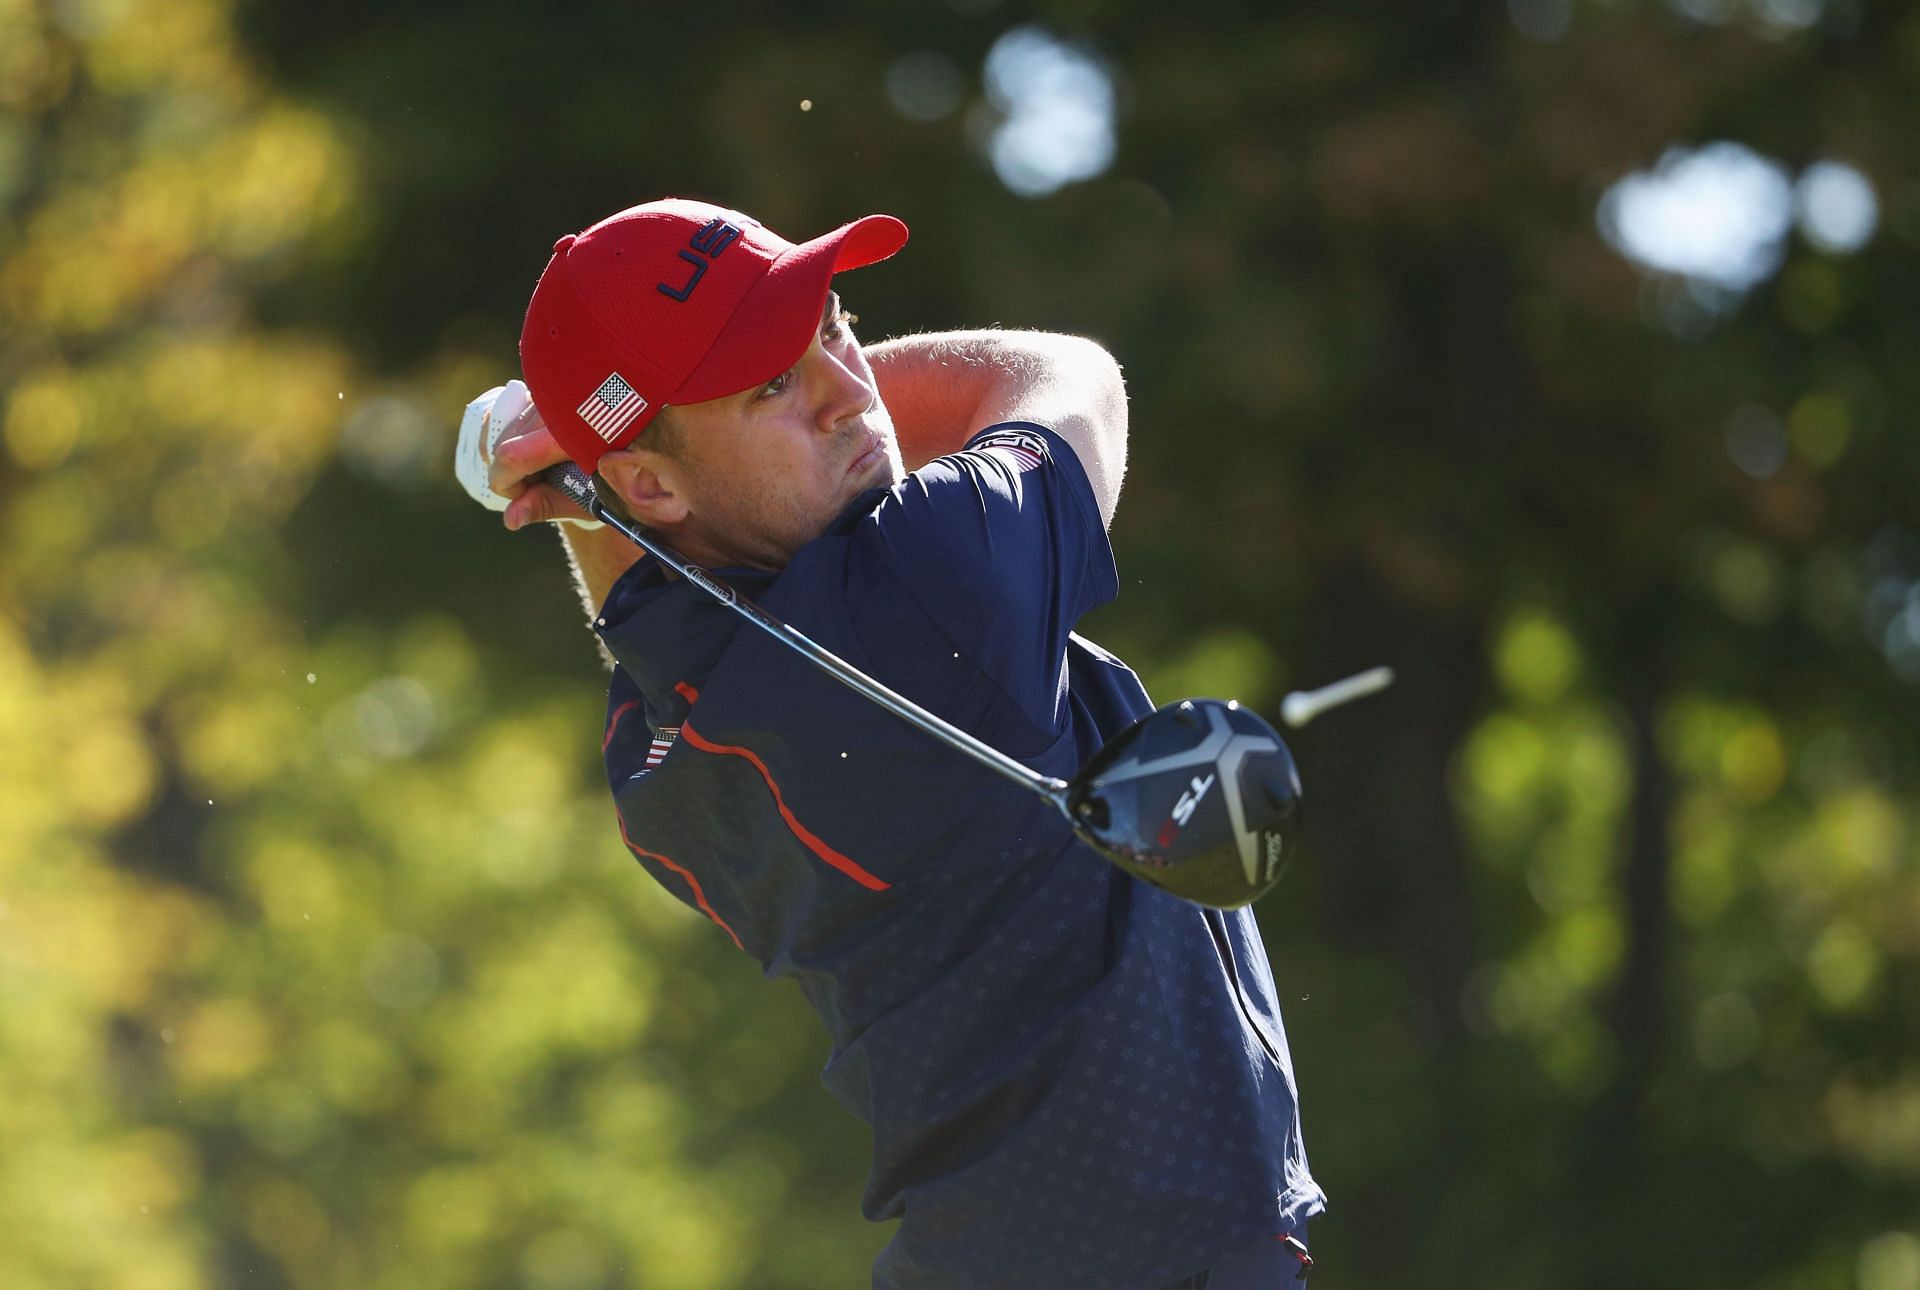 Jordan Speith at the 2018 Ryder Cup (via Getty Images)